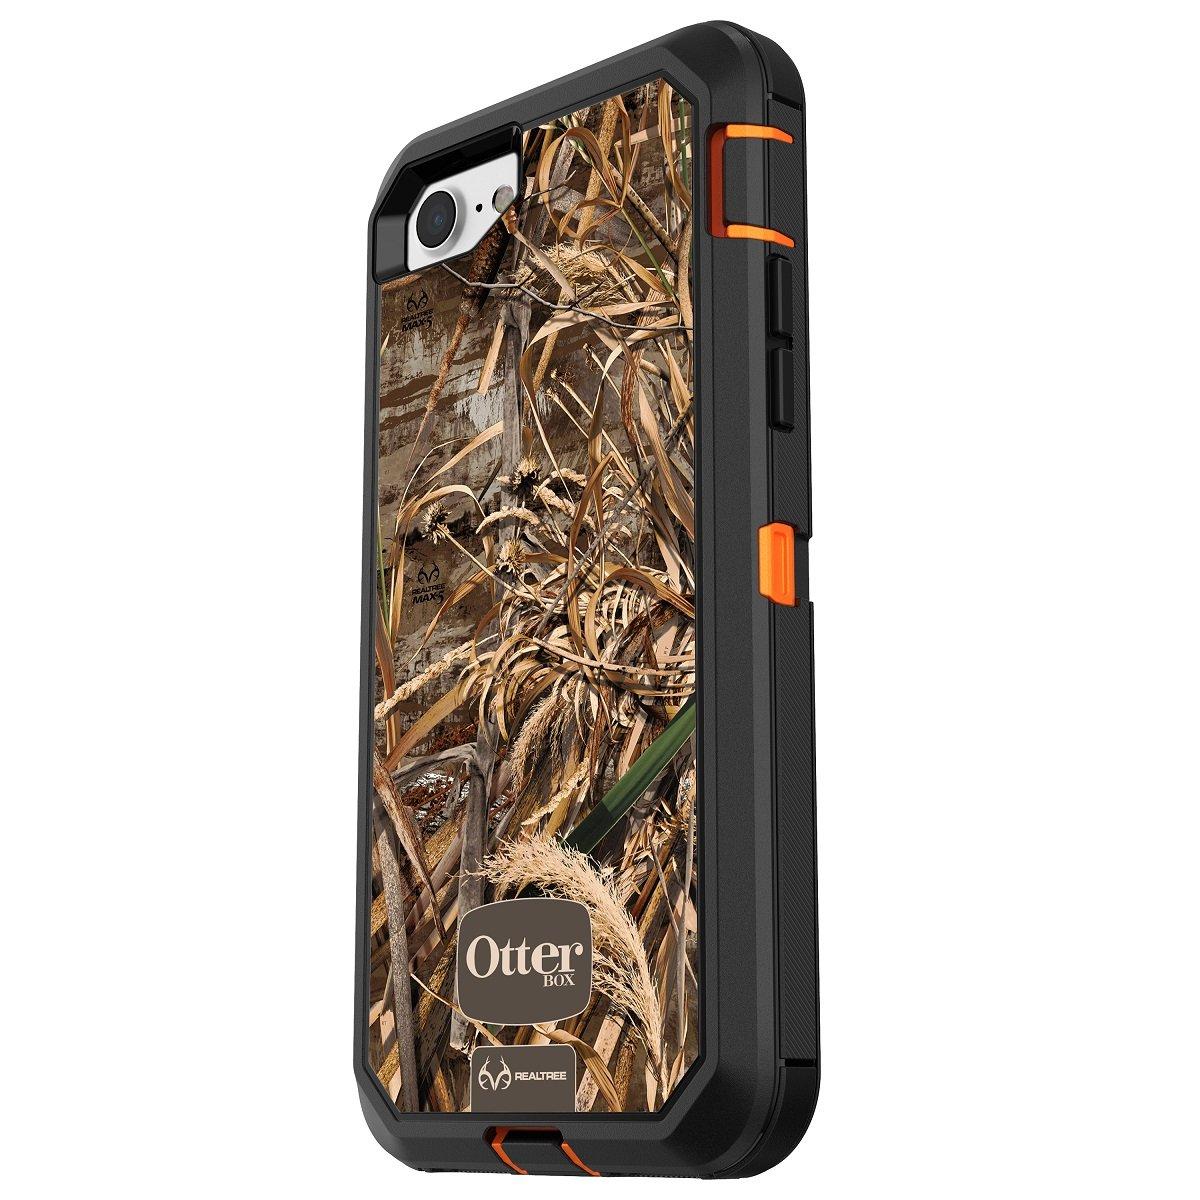 OtterBox Defender Series for iPhone, Galaxy S8, iPhone 6/6s and Galaxy S7